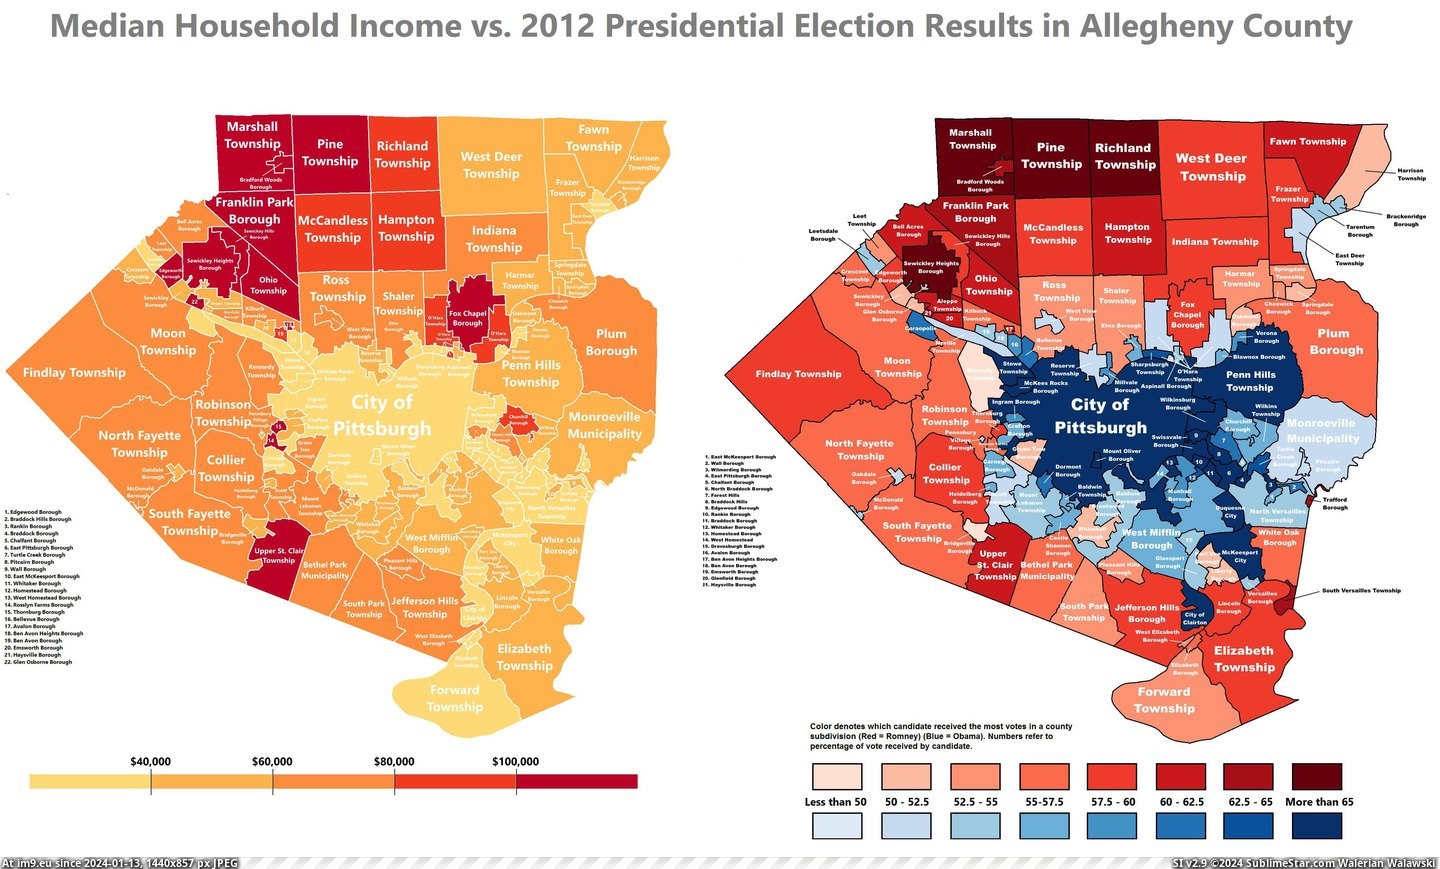 #County #Results #Elections #Pittsburgh #Household #Income #Presidential #Median [Mapporn] Median Household Income vs. 2012 Presidential Elections Results in Allegheny County (Pittsburgh) [4232x2532] Pic. (Image of album My r/MAPS favs))